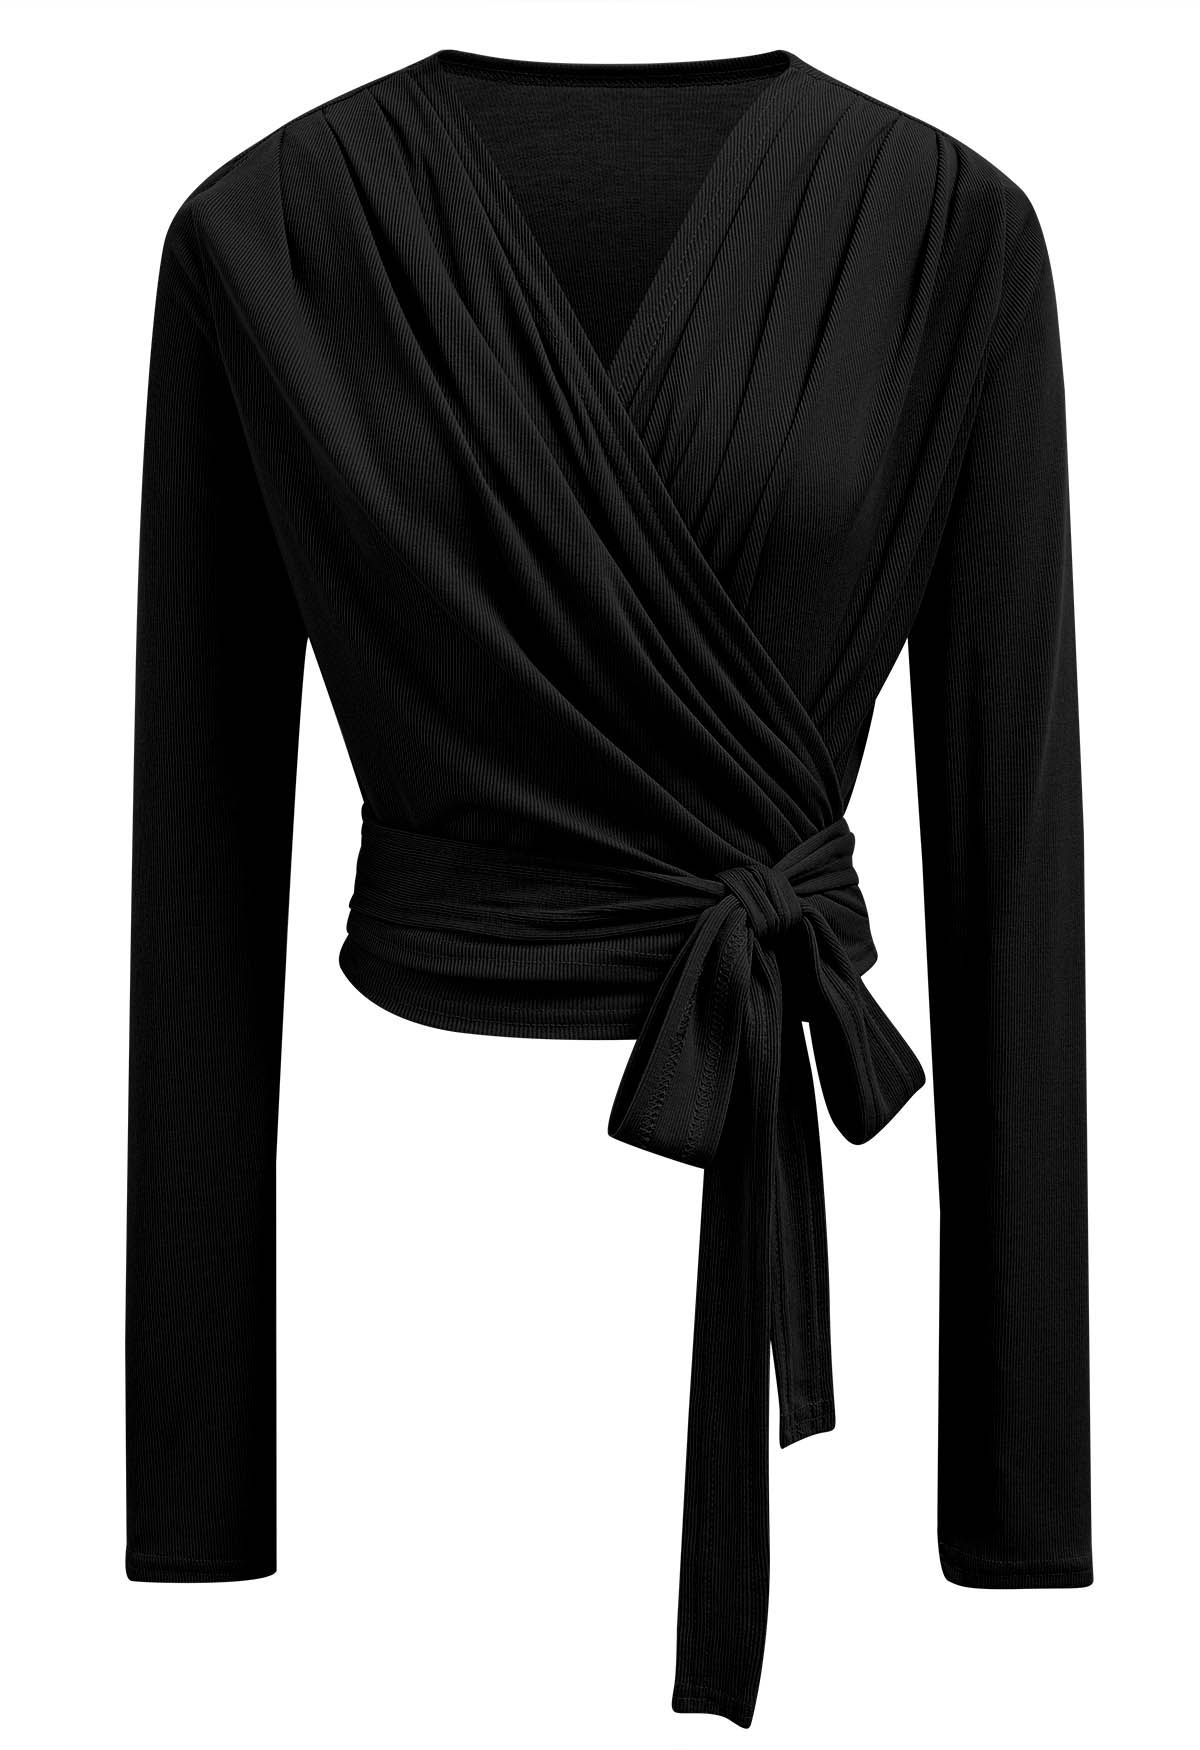 Form Fitting Long Sleeve Wrap Top with Self-Tie